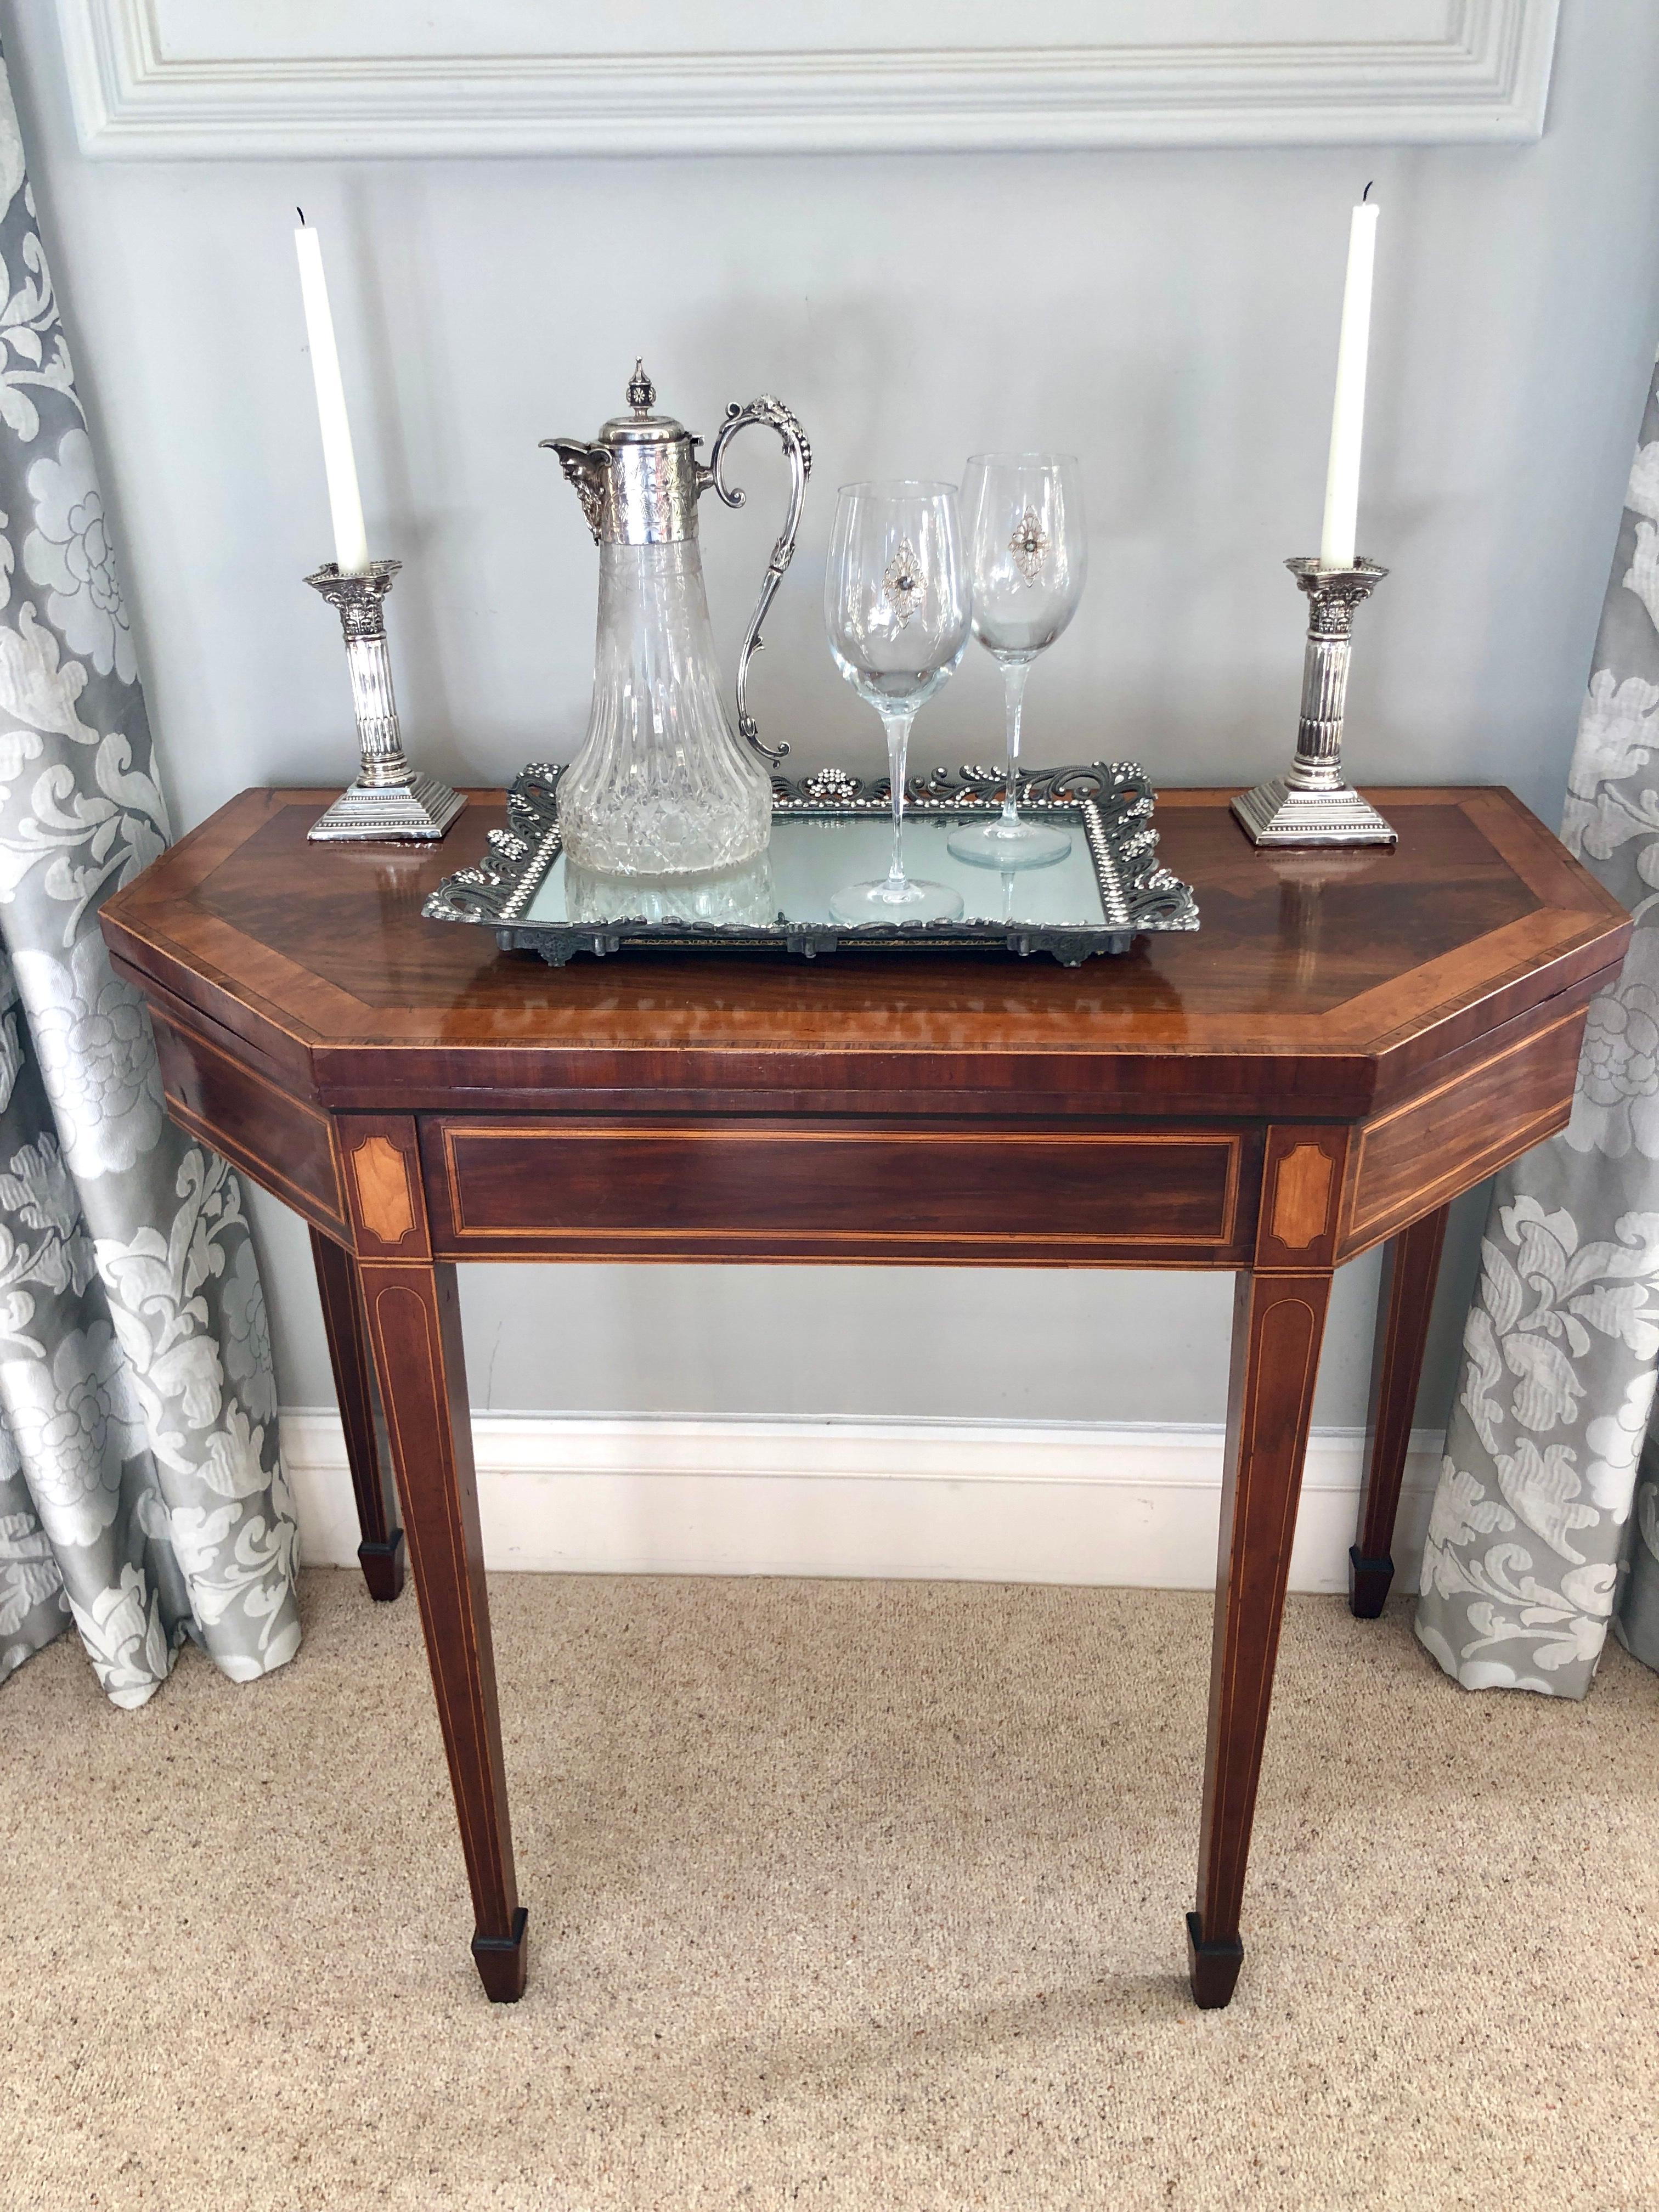 George III mahogany, satinwood and tulipwood banded fold over card table of attractive canted rectangular form having a wonderful patina with hinged leaf enclosing a green baize lined interior. It is raised on elegant square inlaid legs with spade